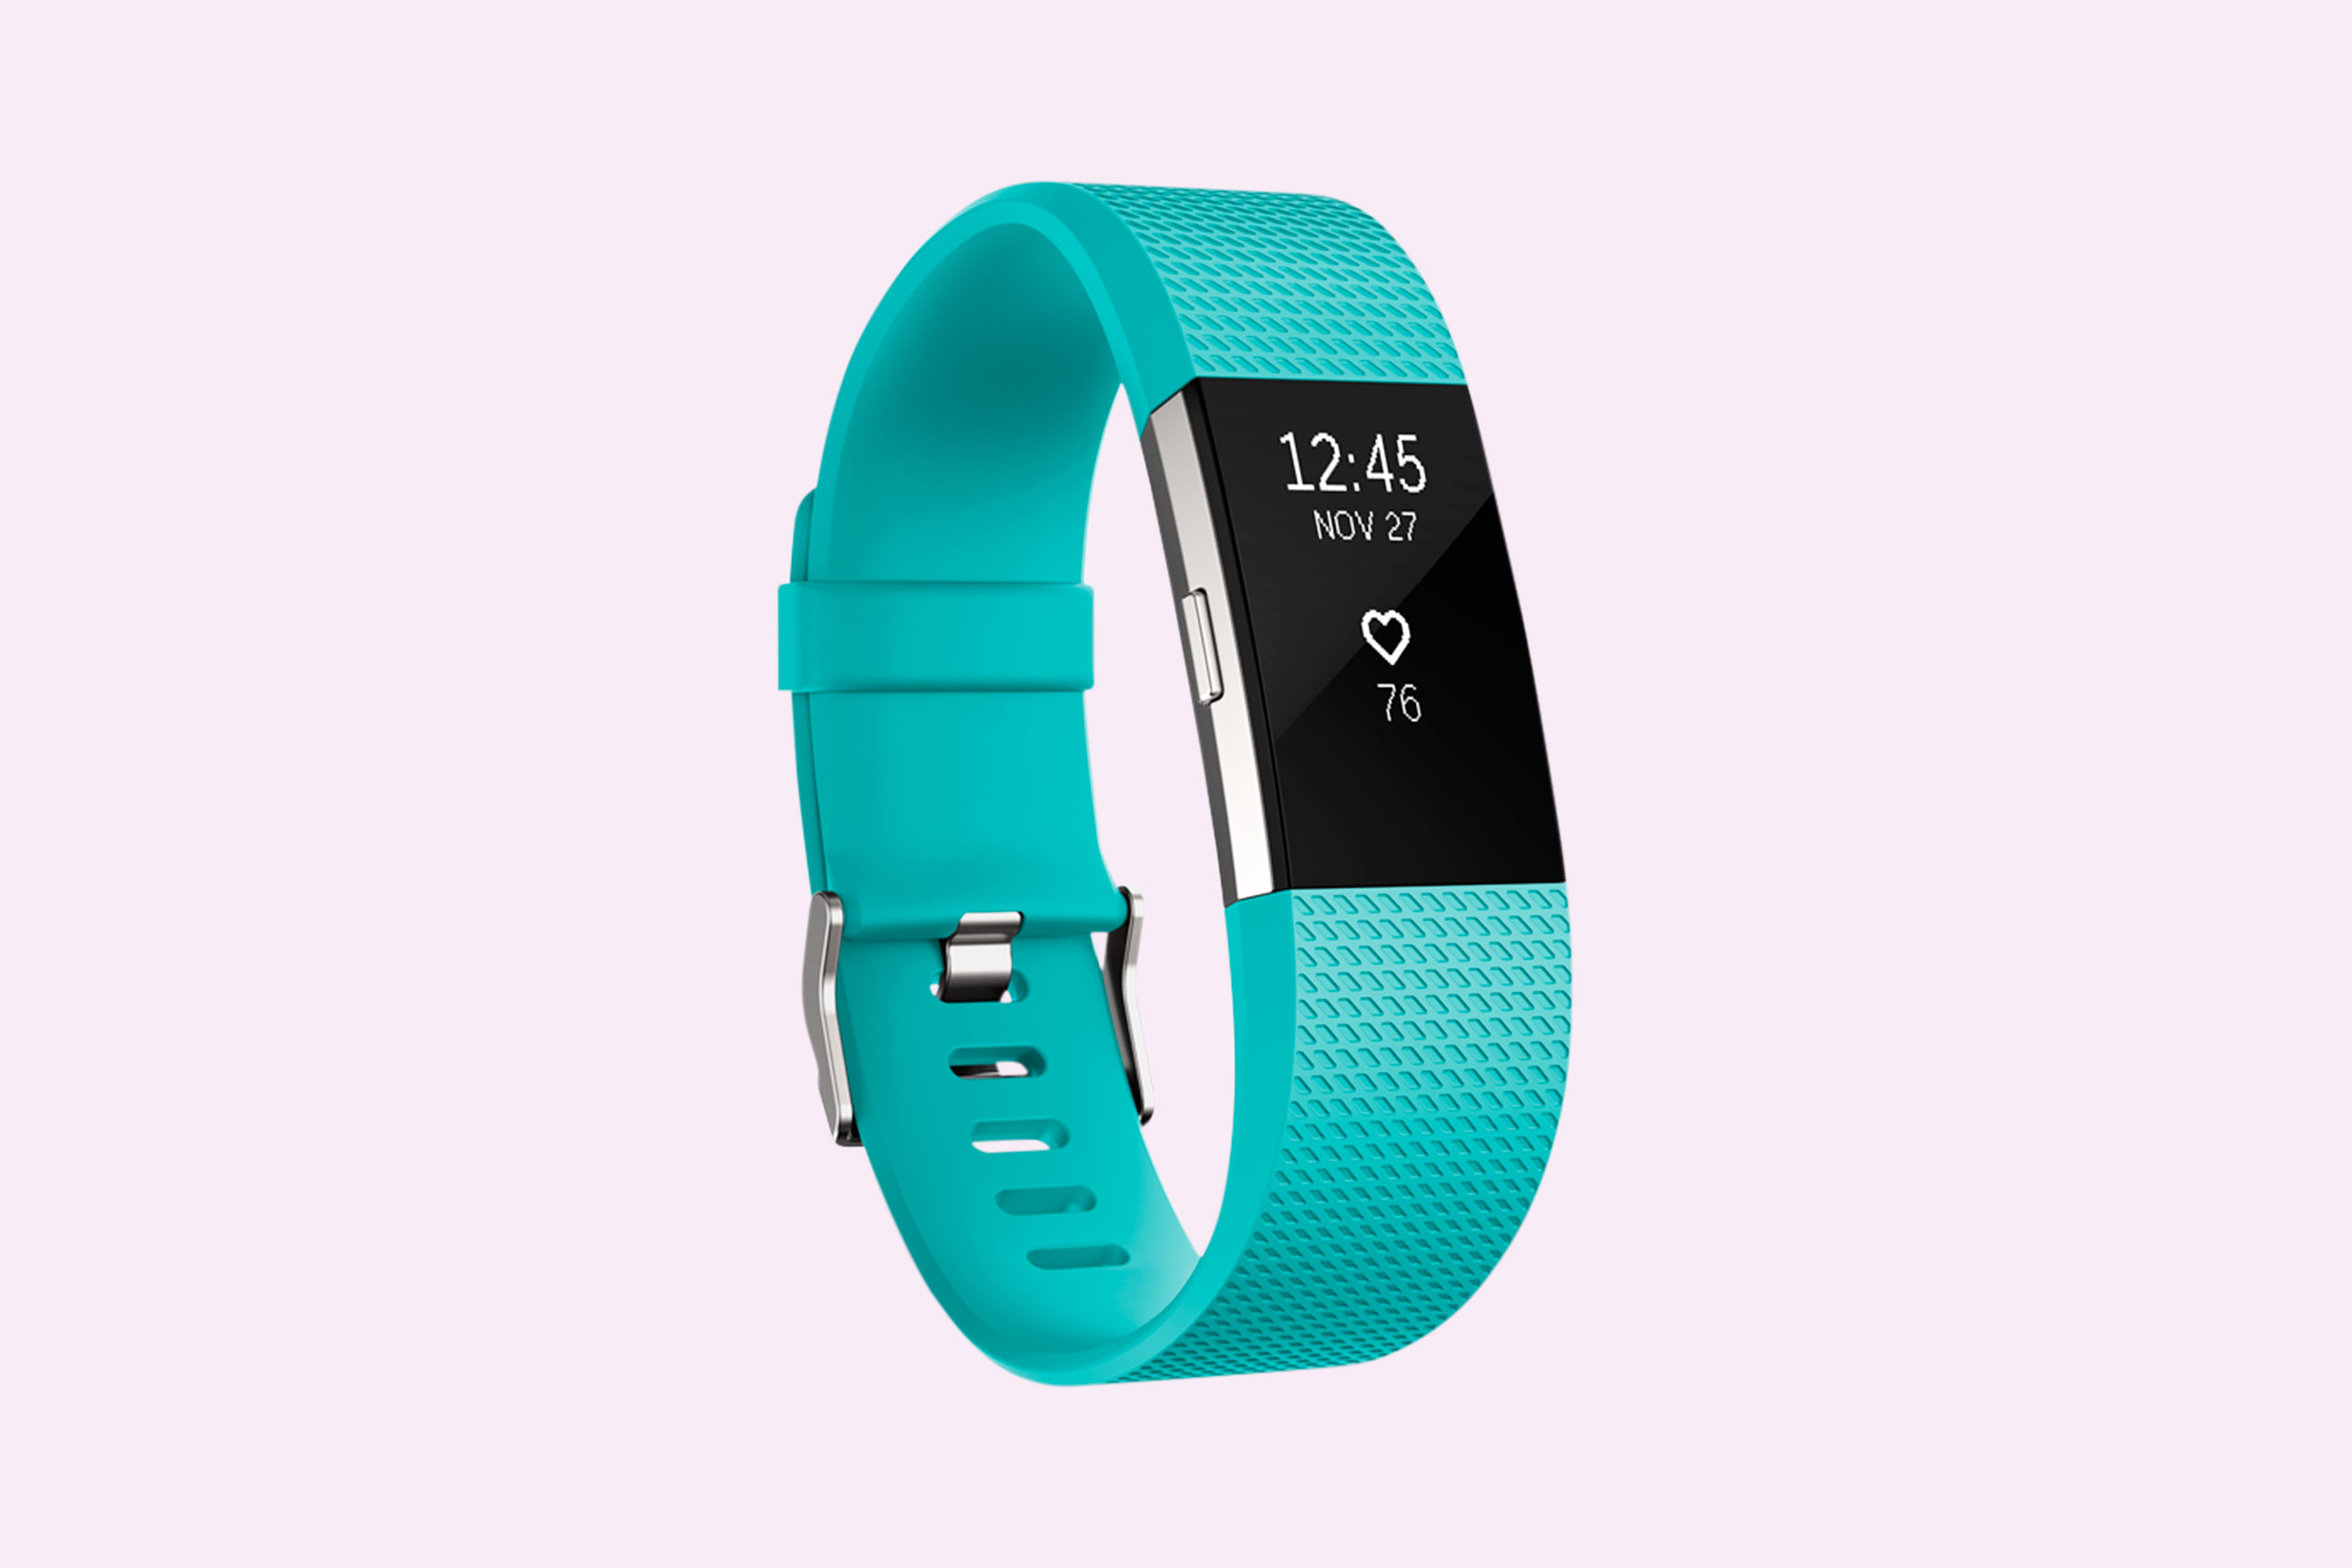 Huawei fit 2 экран. Fitbit charge 2. Фитнес браслет Fitbit. Браслет Huawei Fit 2. Умный браслет Fitbit charge 2.